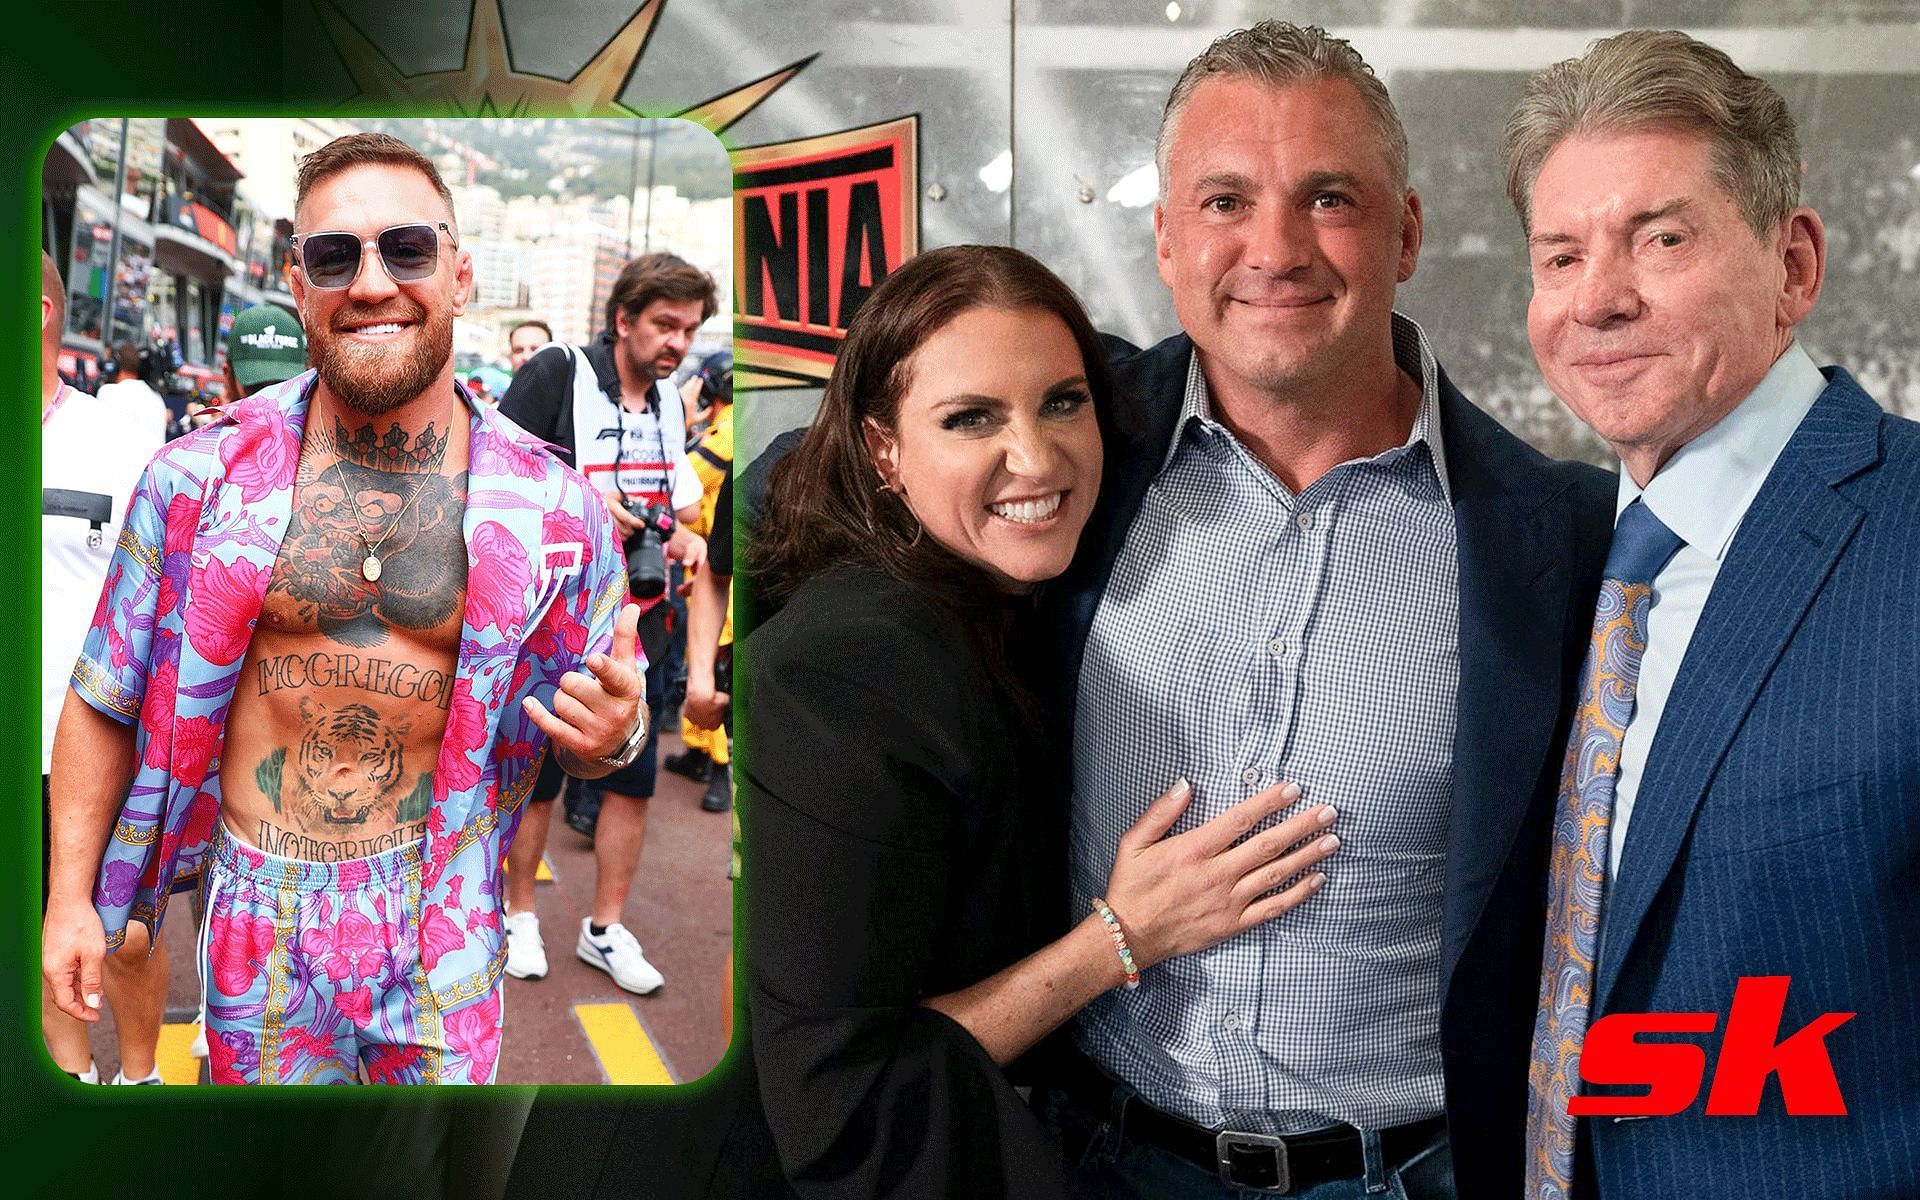 Conor McGregor and the McMahon family. [Image credits: Getty Images and @VinceMcMahon on Twitter] 